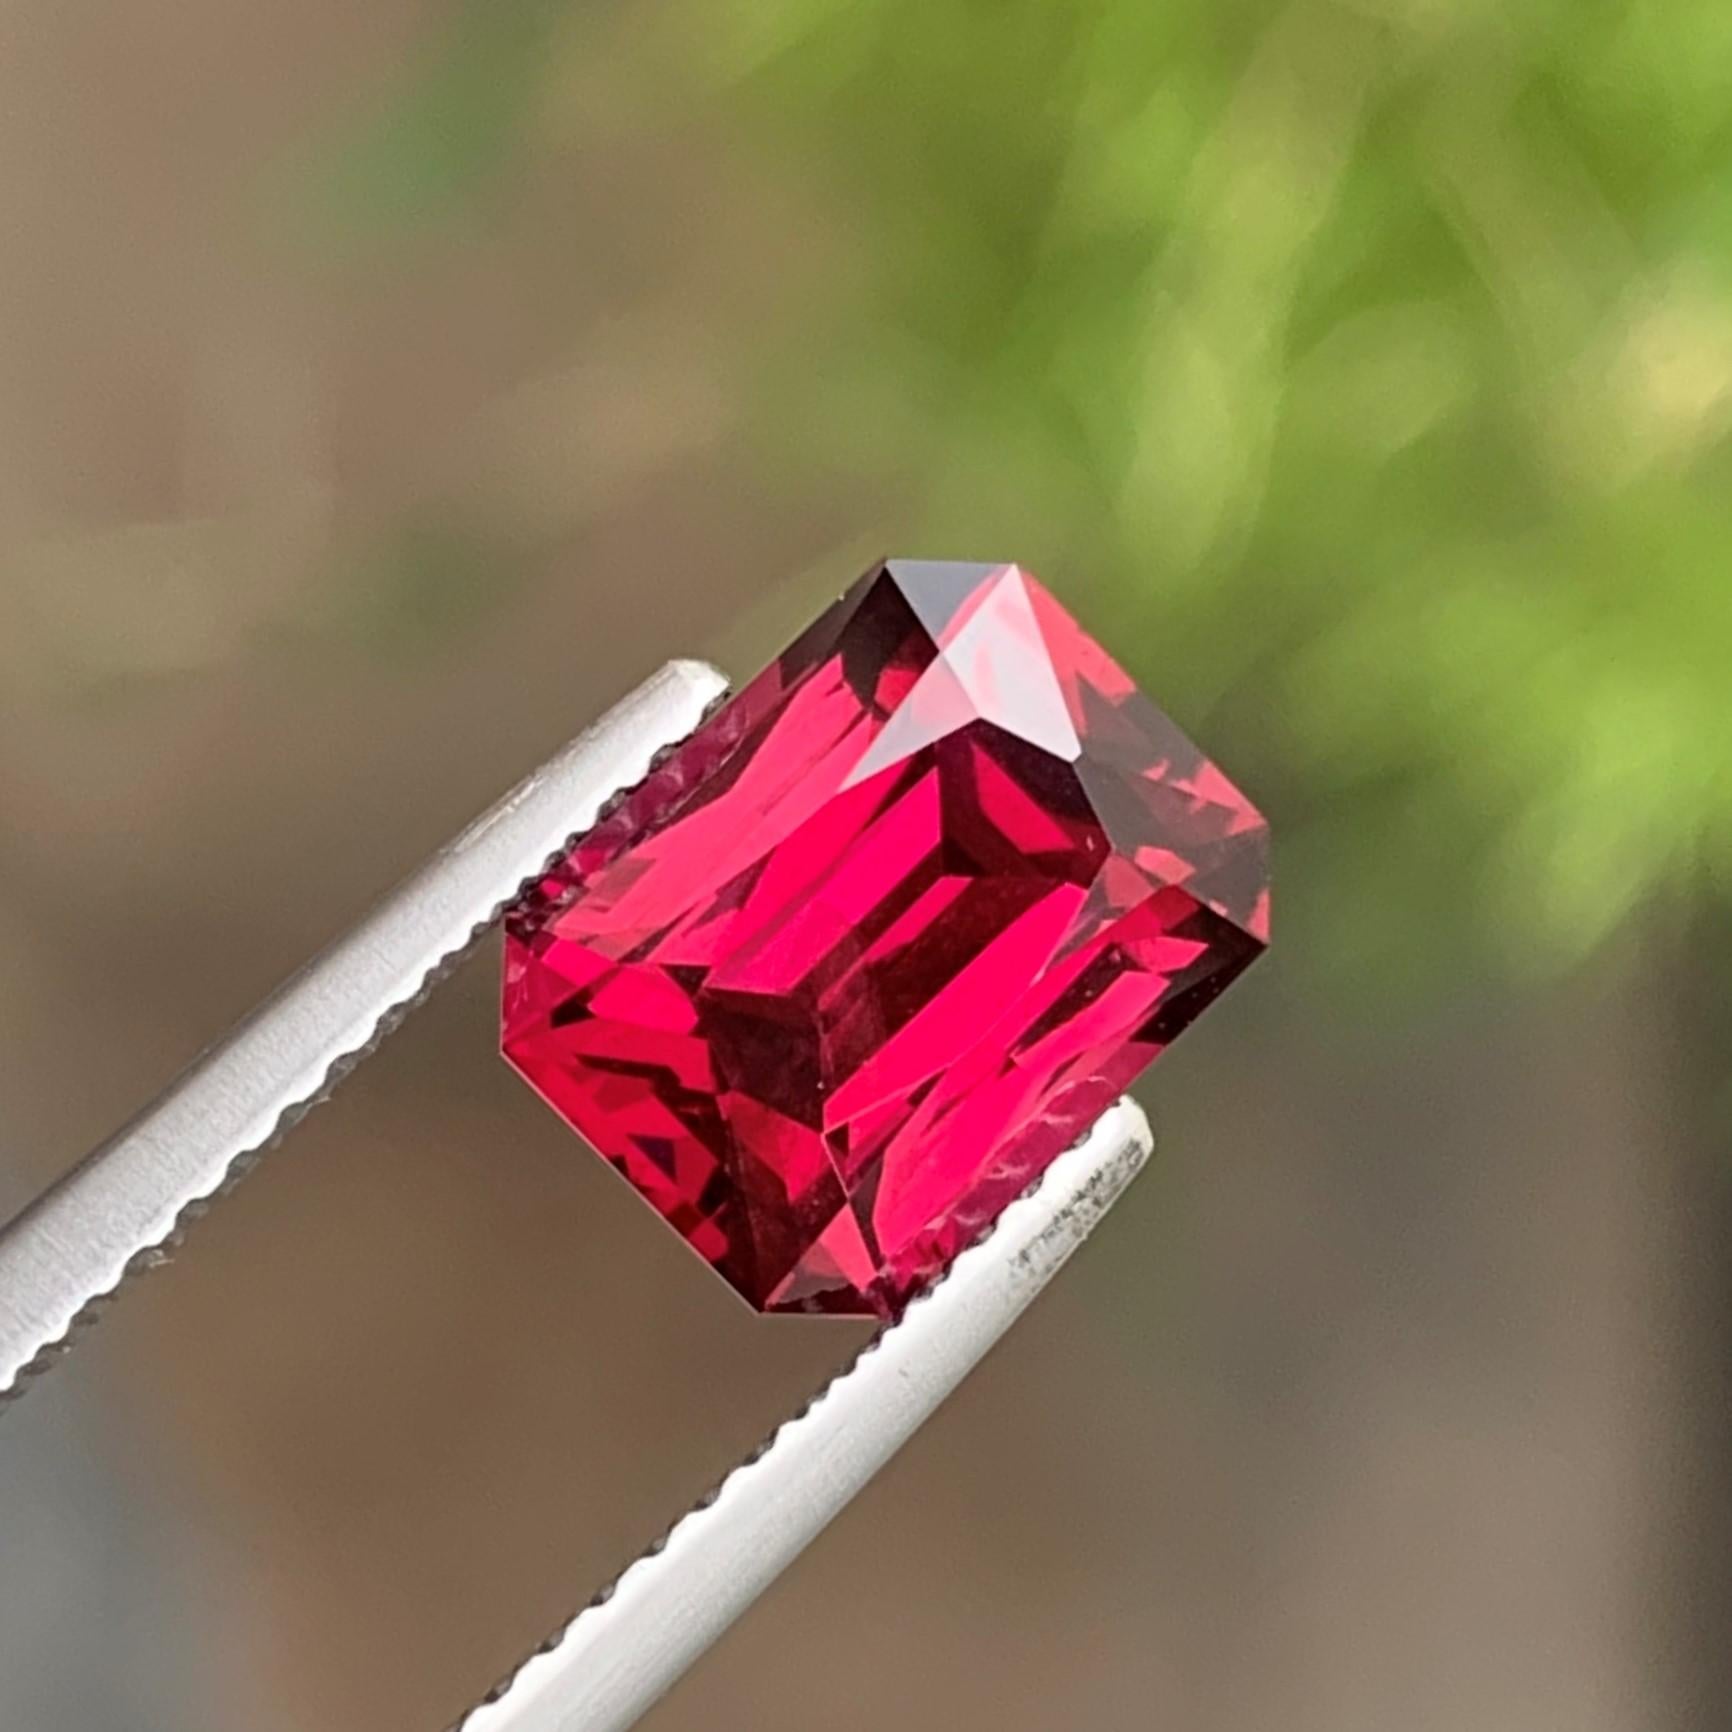 Faceted Rhodolite Garnet
Weight: 3.25 Carats Both
Dimension: 8.9x6.9x5.3 Mm
Origin: Tanzania Africa
Color: Pink Red
Treatment: Non
Shape: Emerald
Cut: Fancy
The Rhodolite resembles pomegranate seeds, since both are eternal both are love symbols.